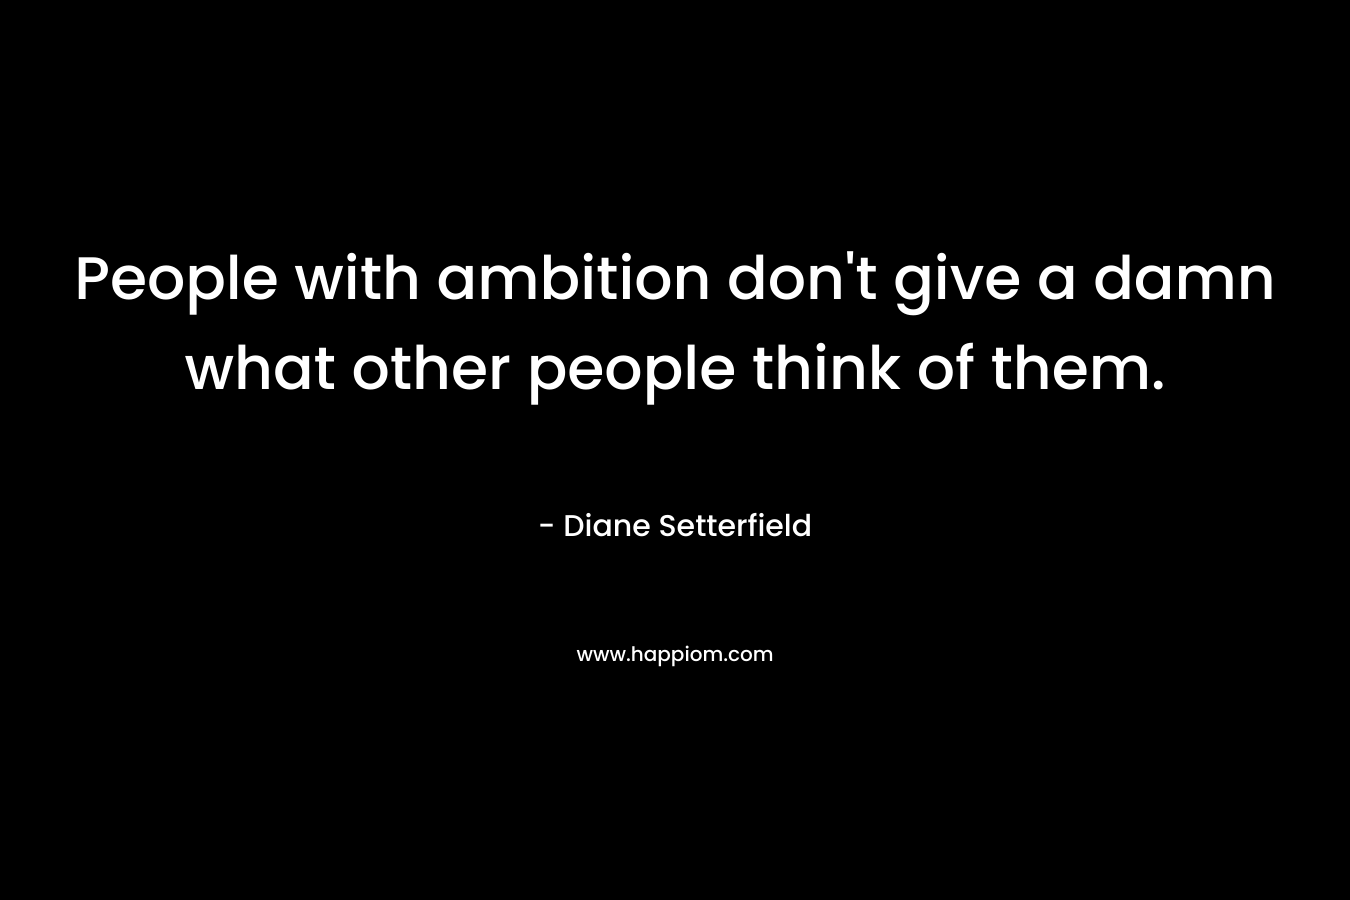 People with ambition don't give a damn what other people think of them.